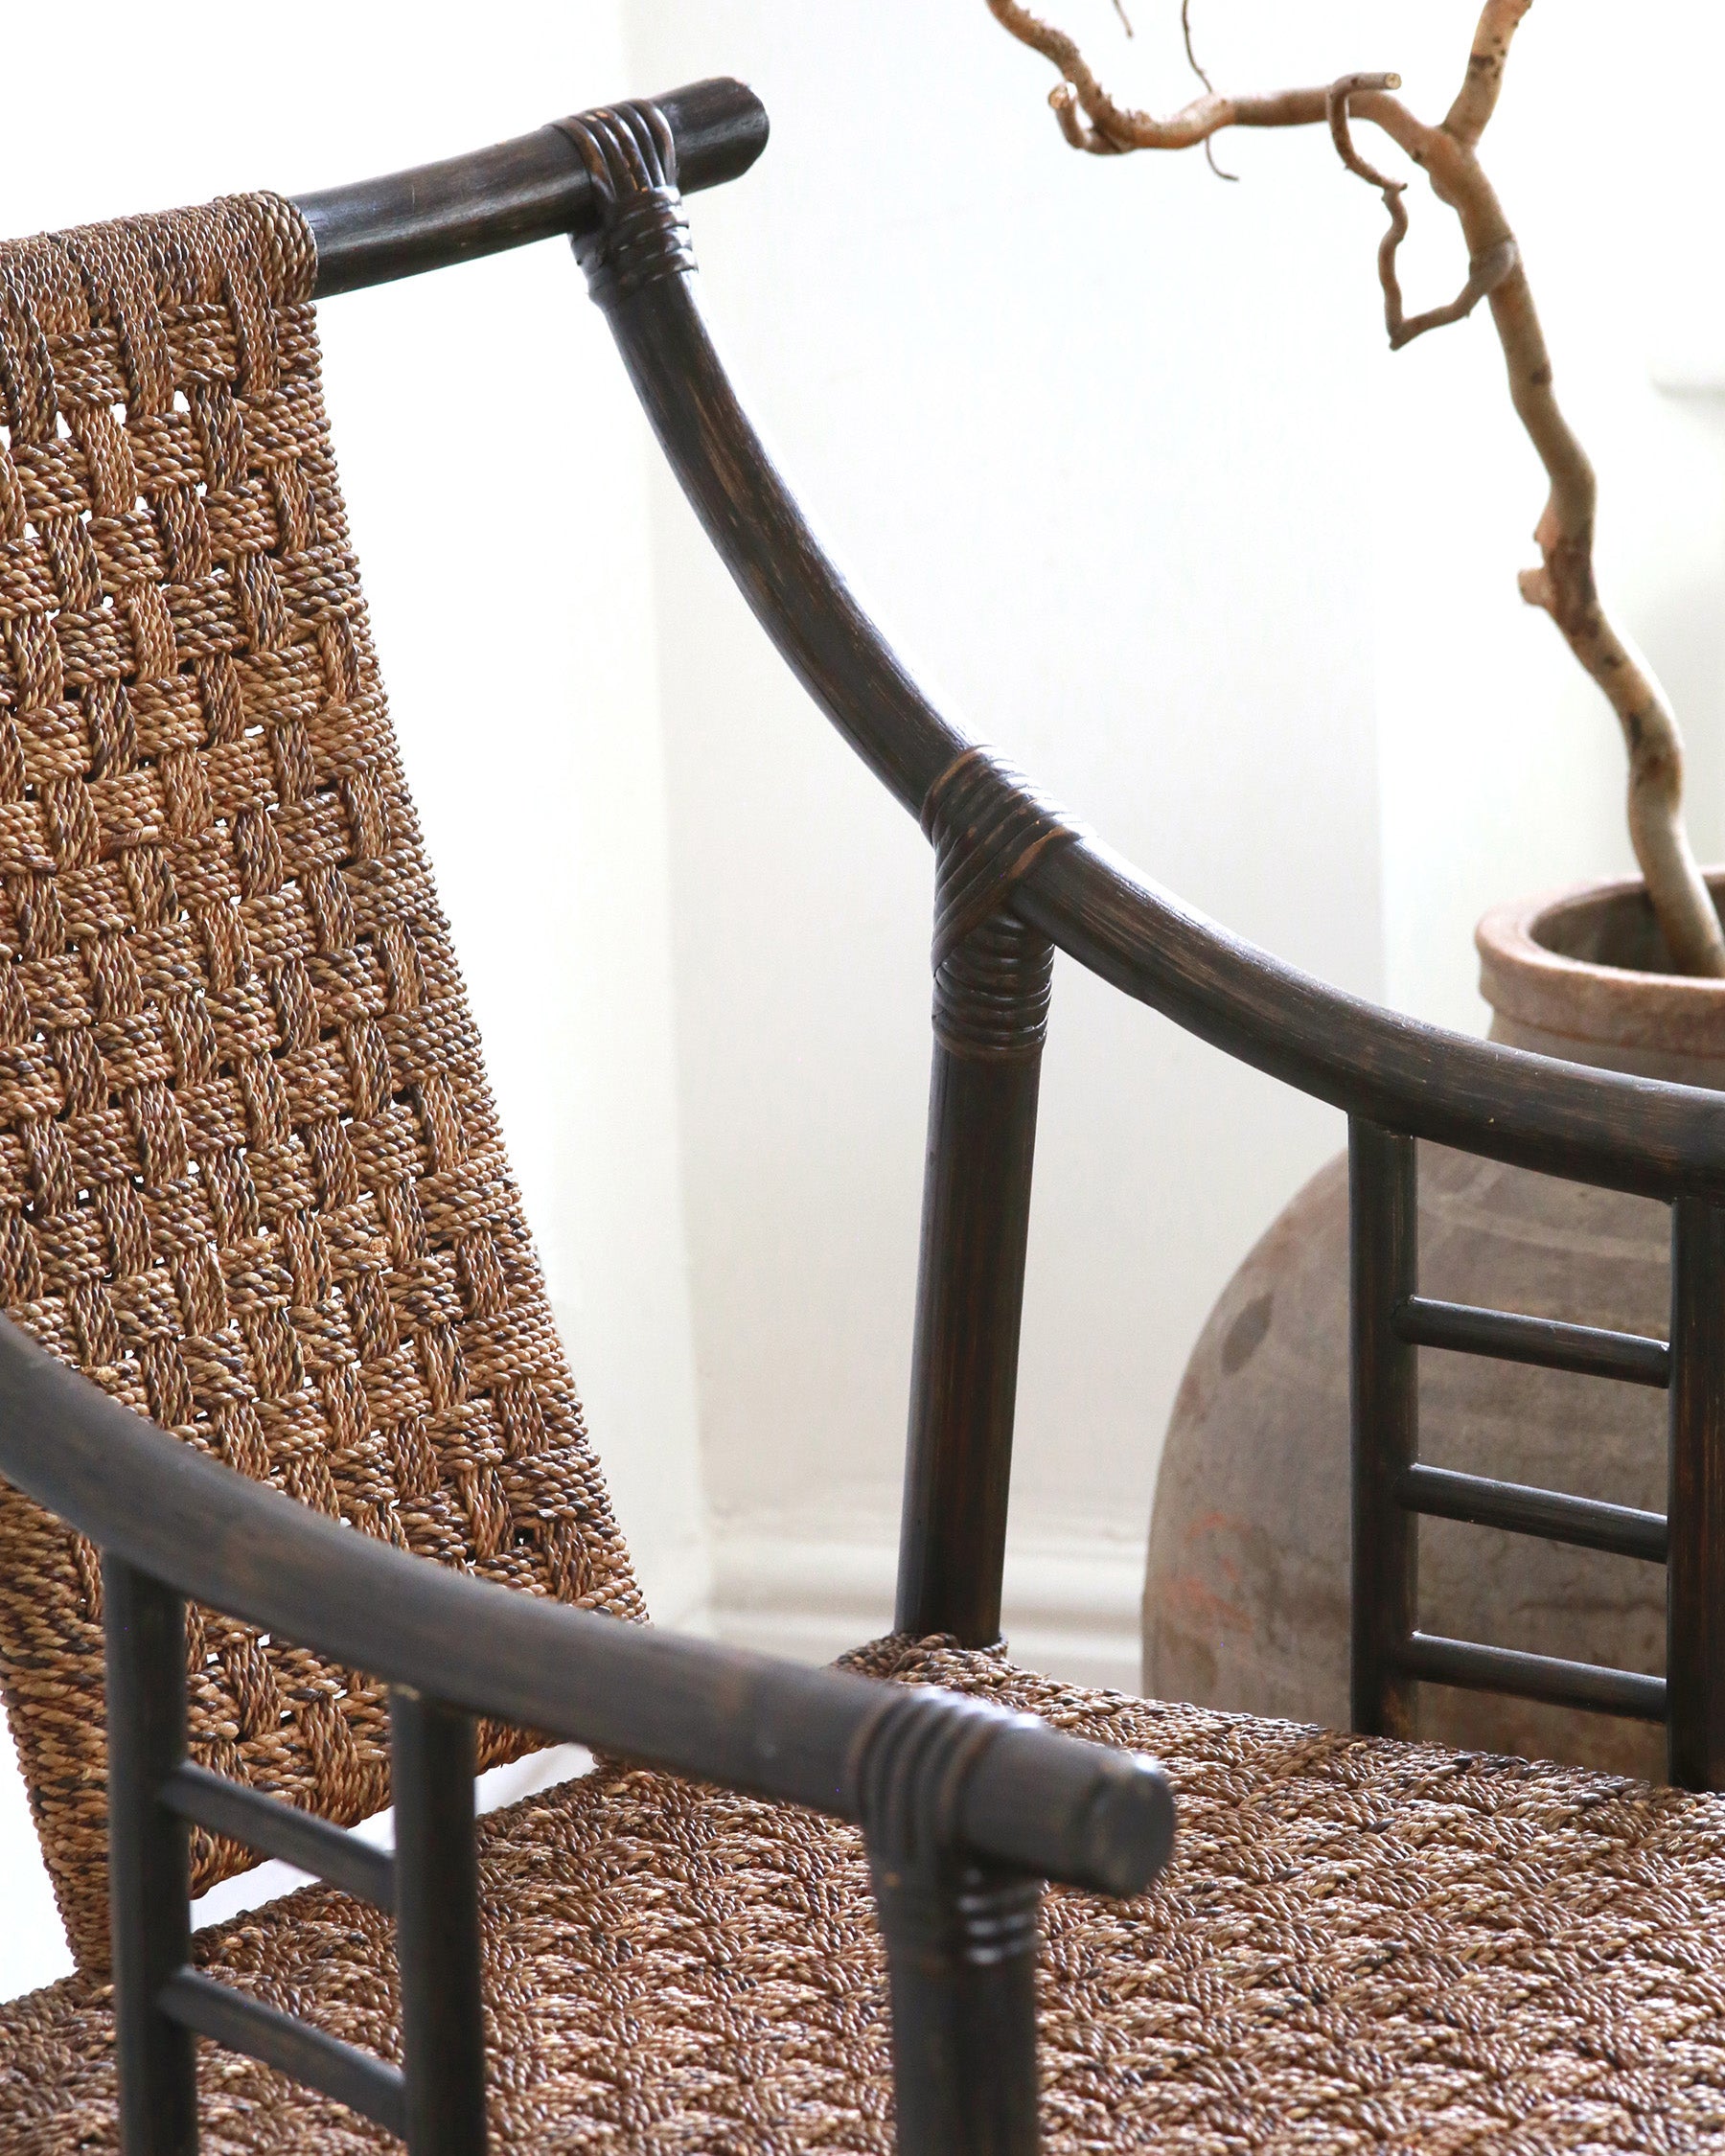 Balinese bamboo frame rope woven armchair close up